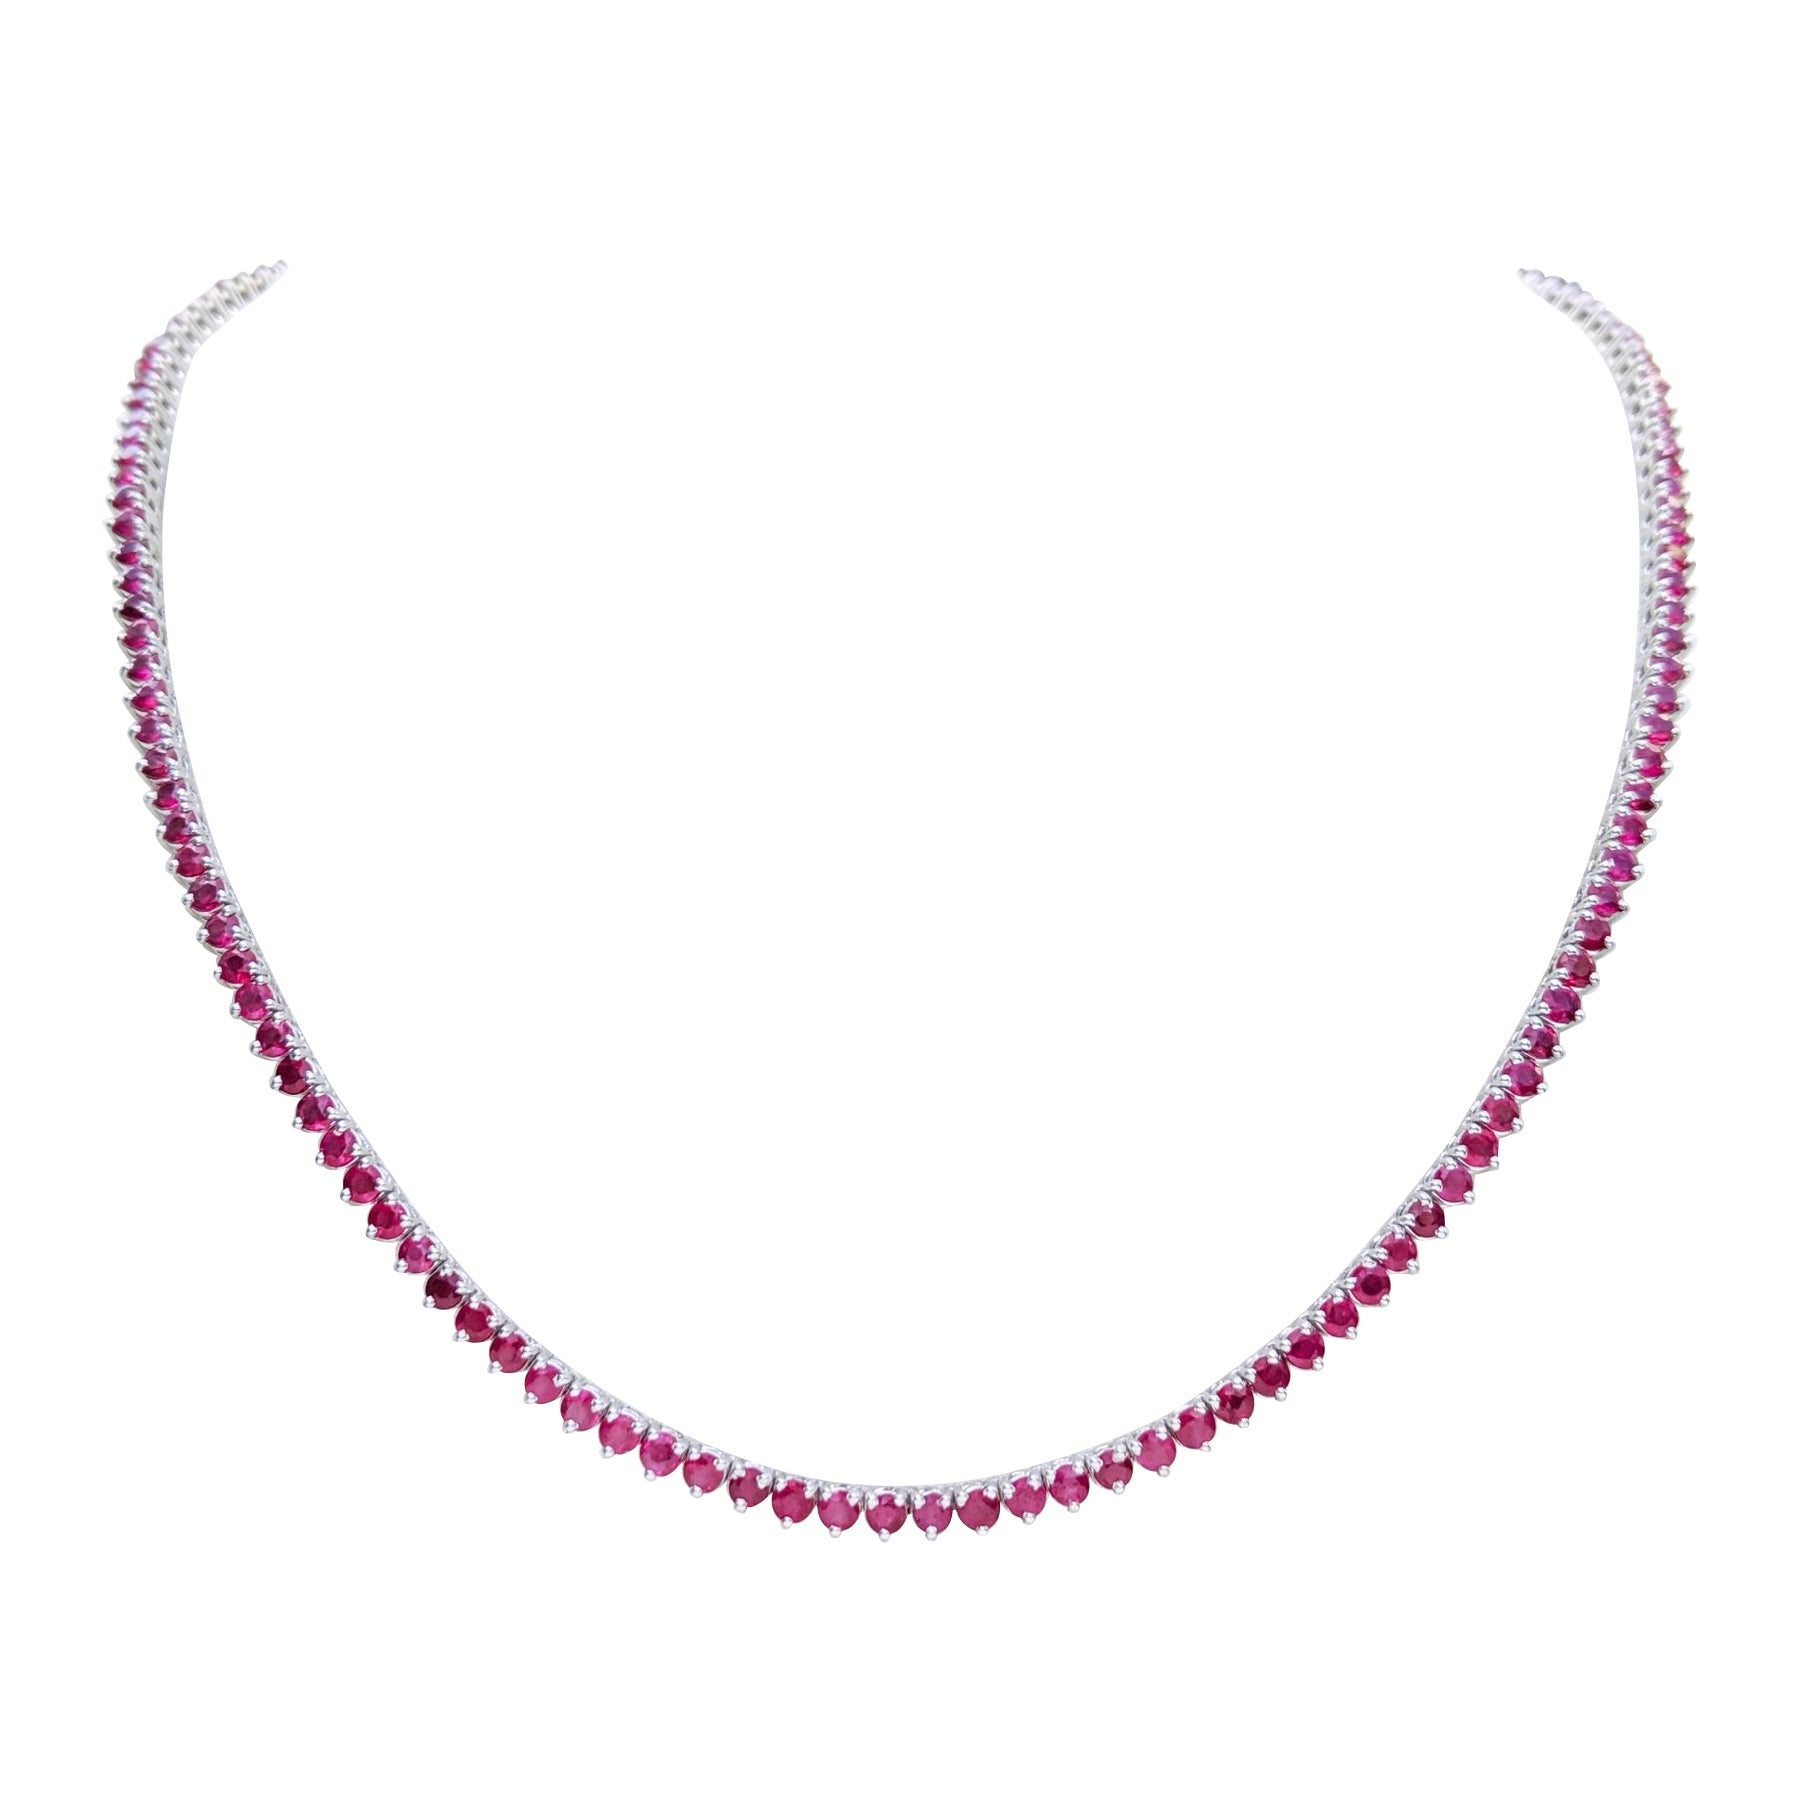 NO RESERVE! Necklace - 14 kt. White gold -  13.92 tw. Ruby  For Sale